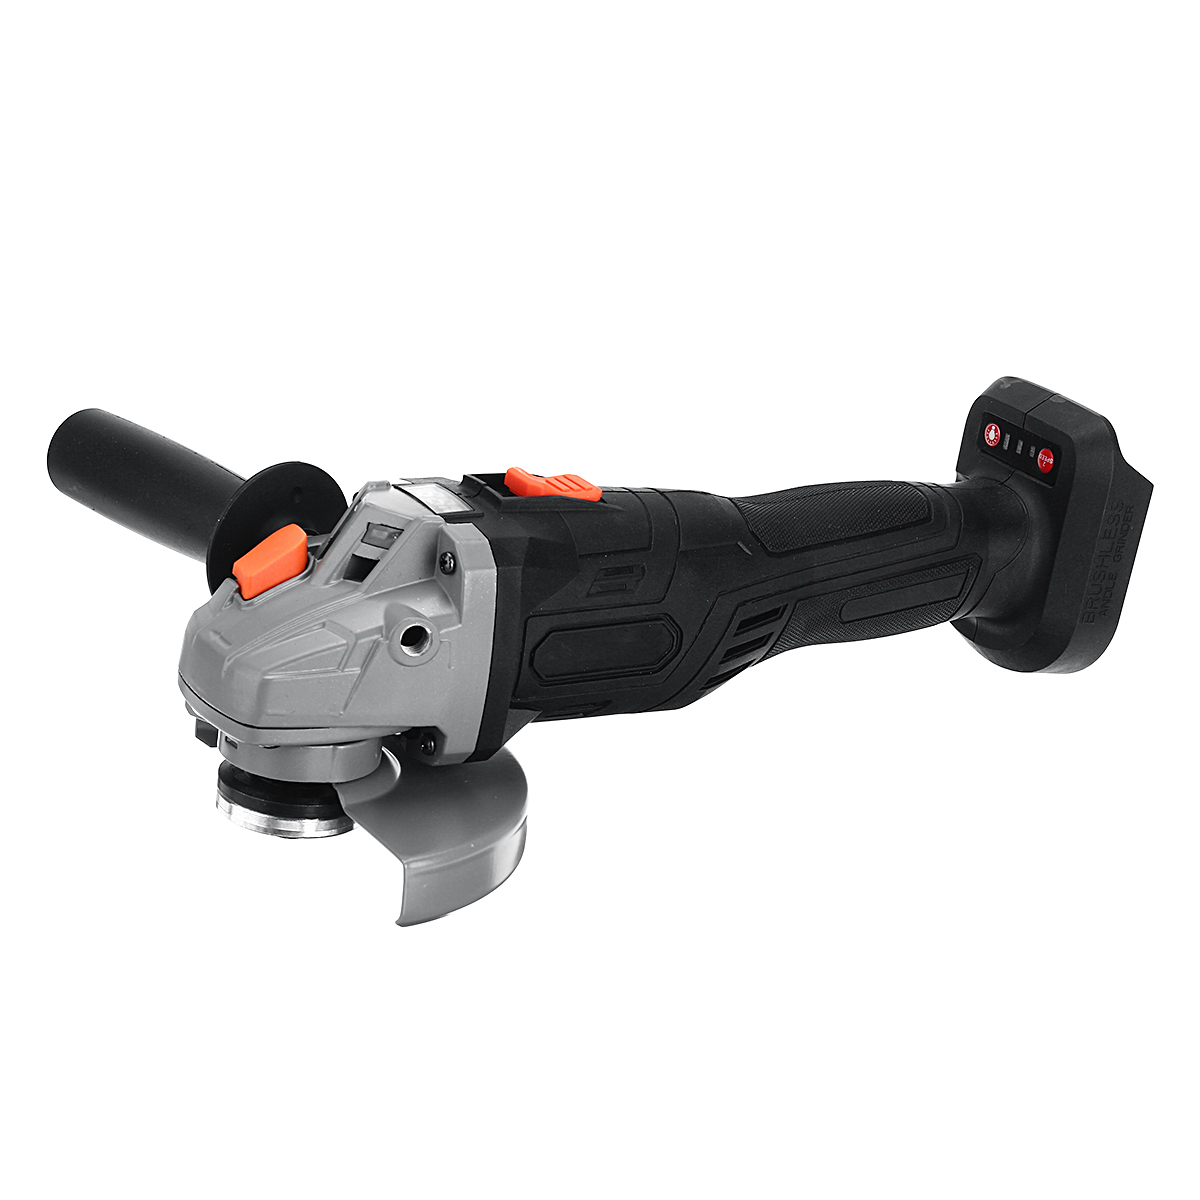 800W-125mm-Display-Cordless-Brushless-Angle-Grinder-Electric-Angle-Grinding-Cutting-Machine-For-18V--1688998-5